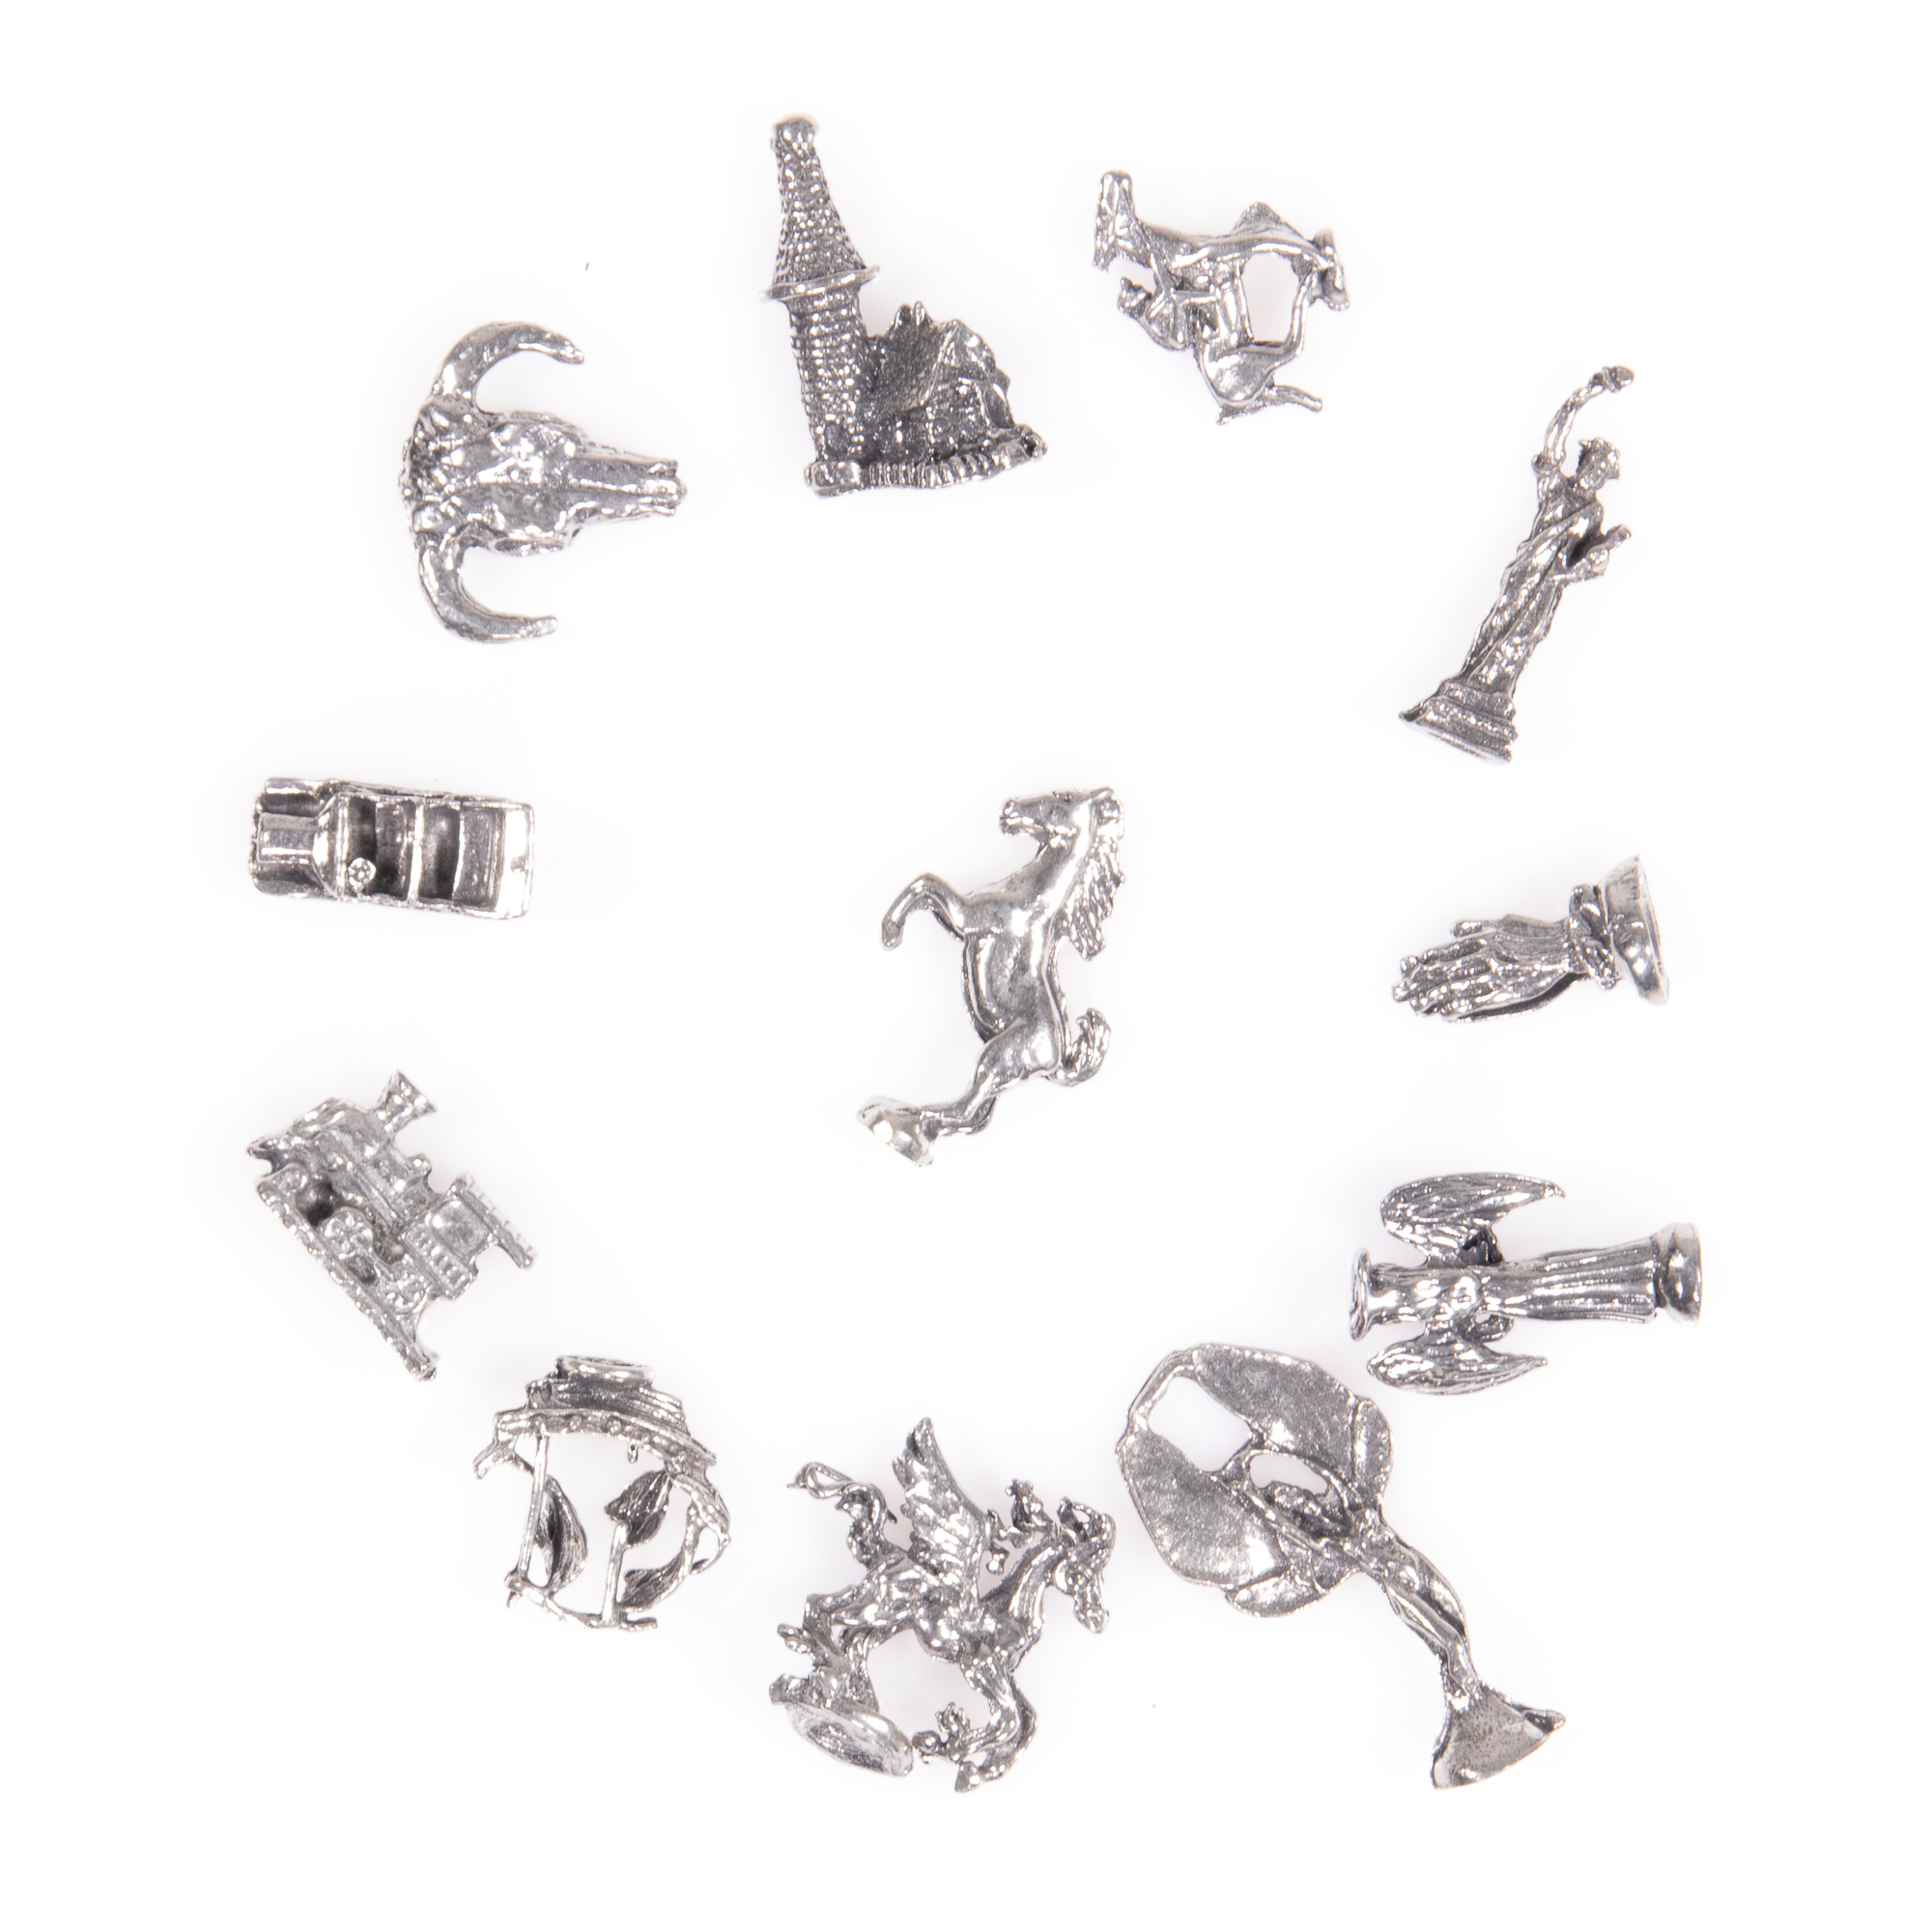 Selection of 12x Silver Novelty Charms - Image 5 of 6